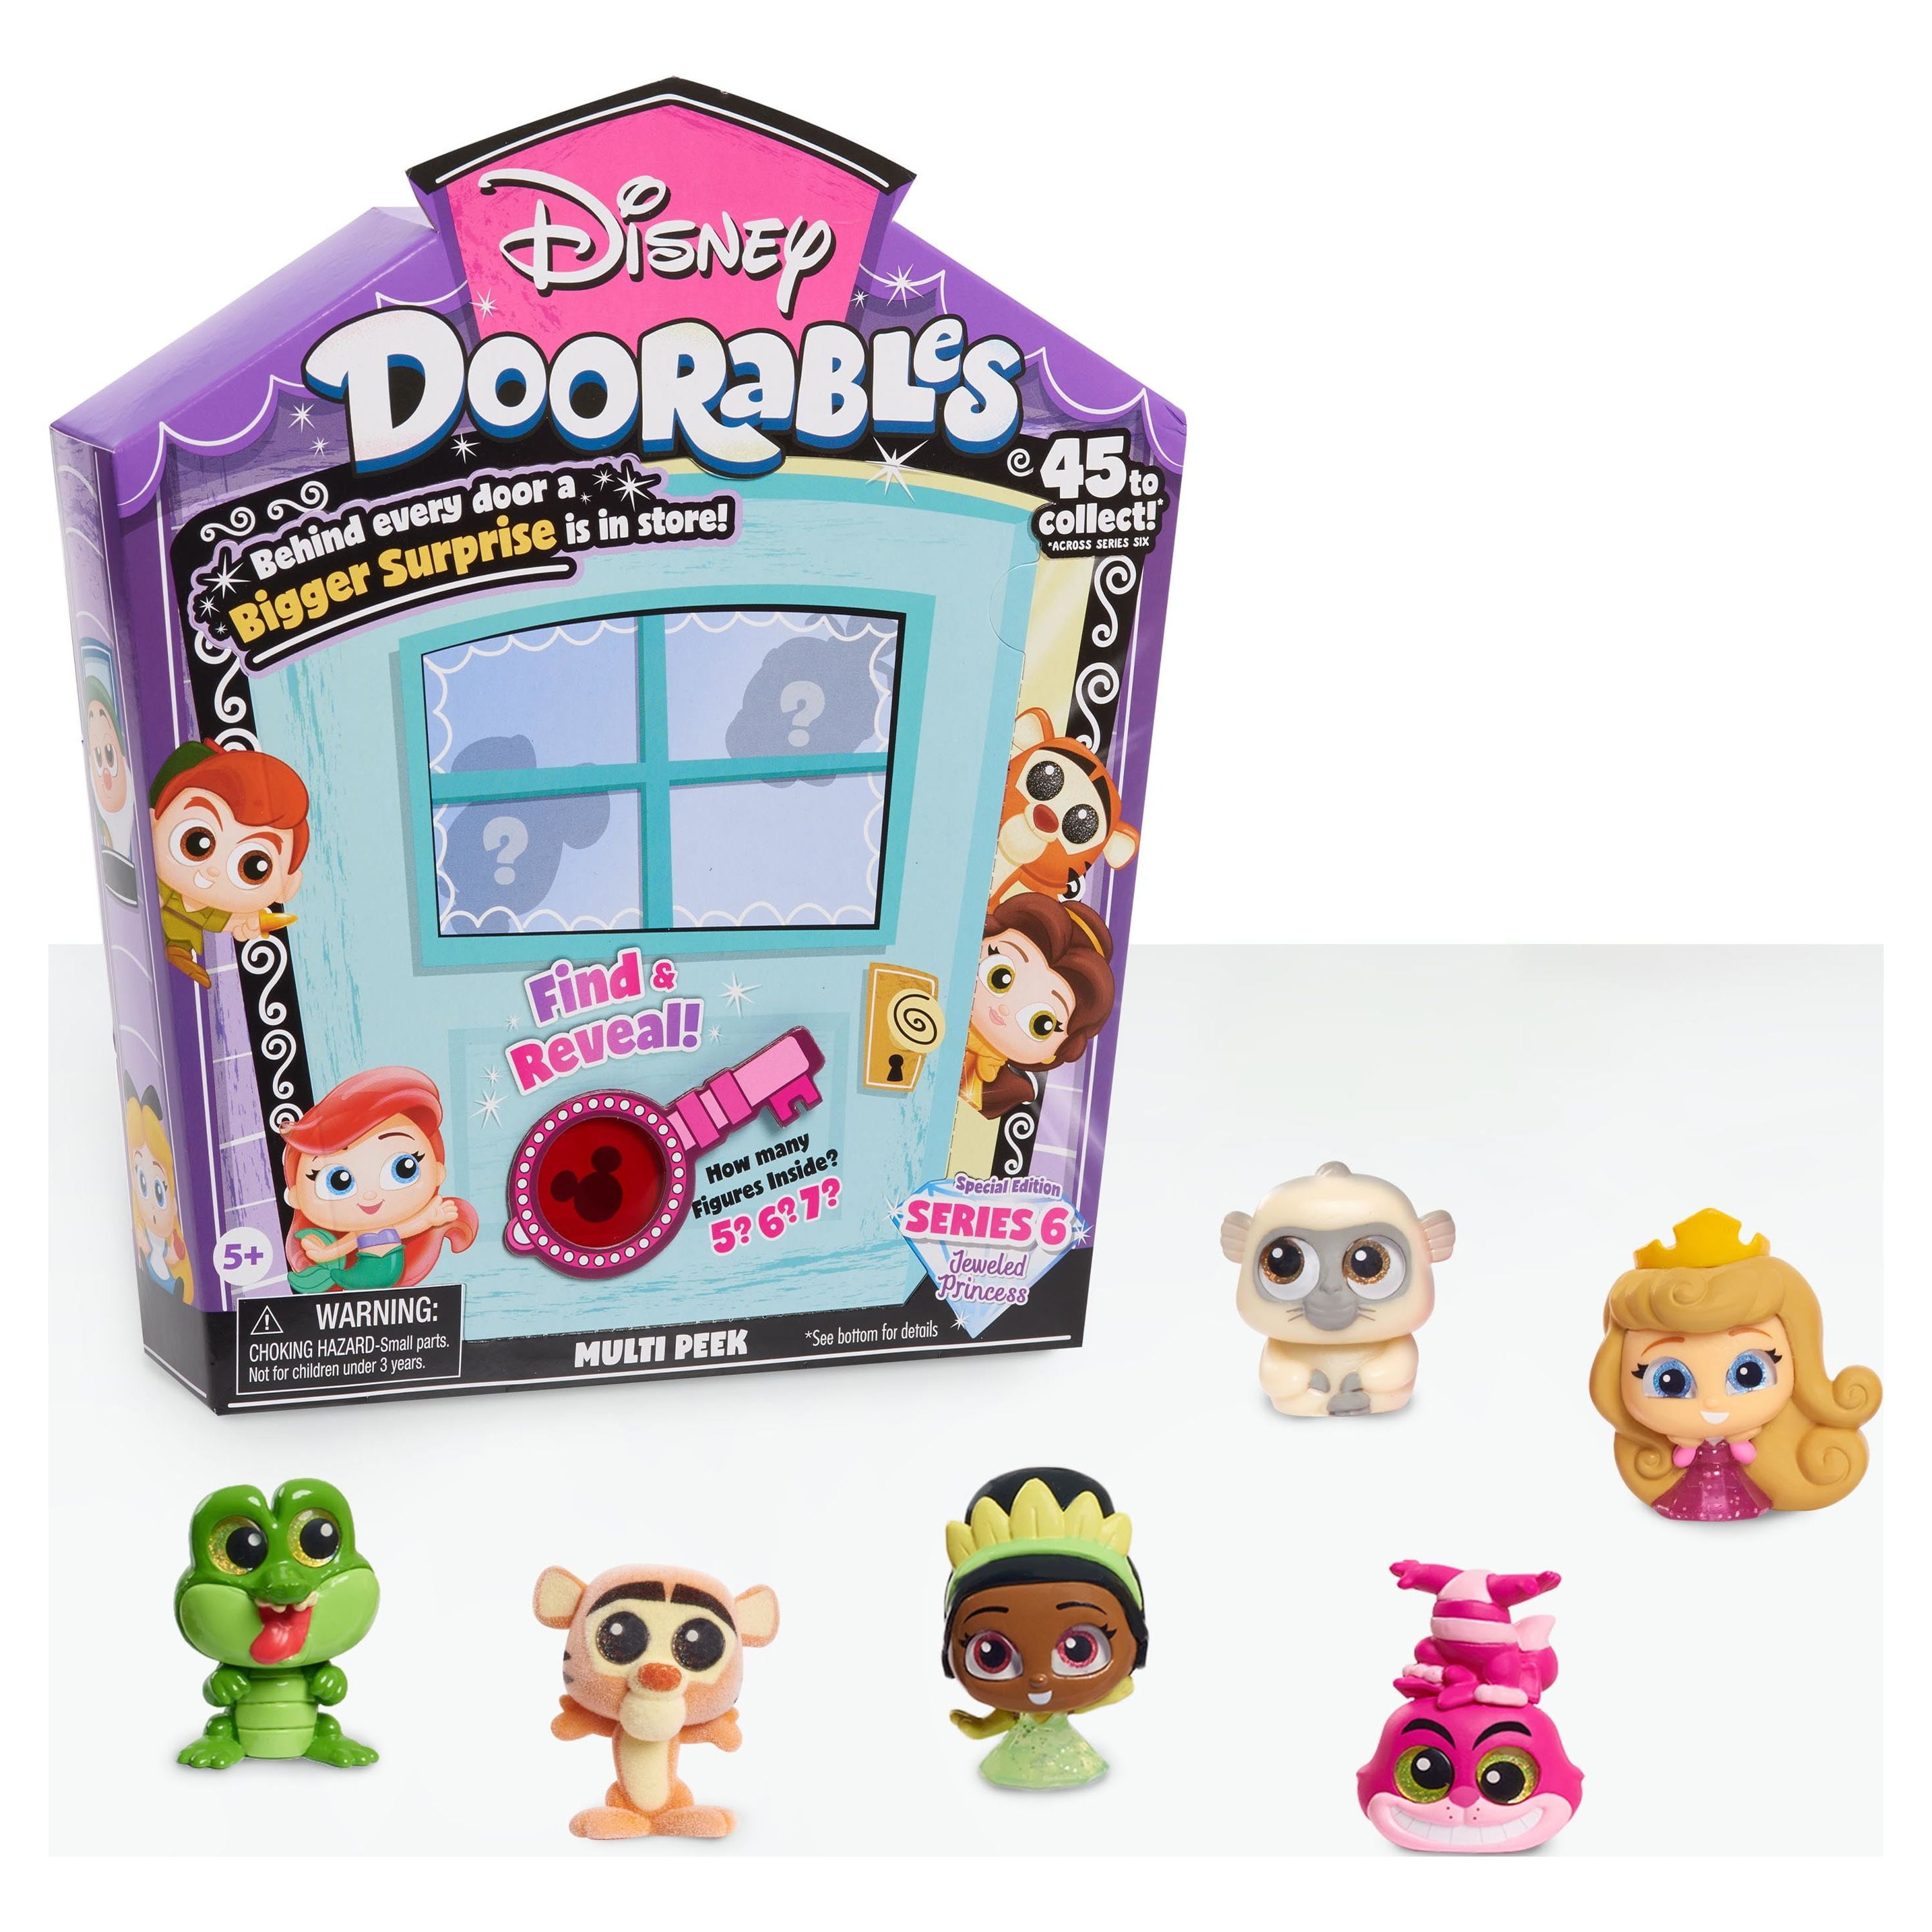 Disney Doorables Multi Peek Series 6 Jeweled Disney Princess Characters,  Includes 5, 6, or 7 Collectible Mini Figures, Styles May Vary, Officially